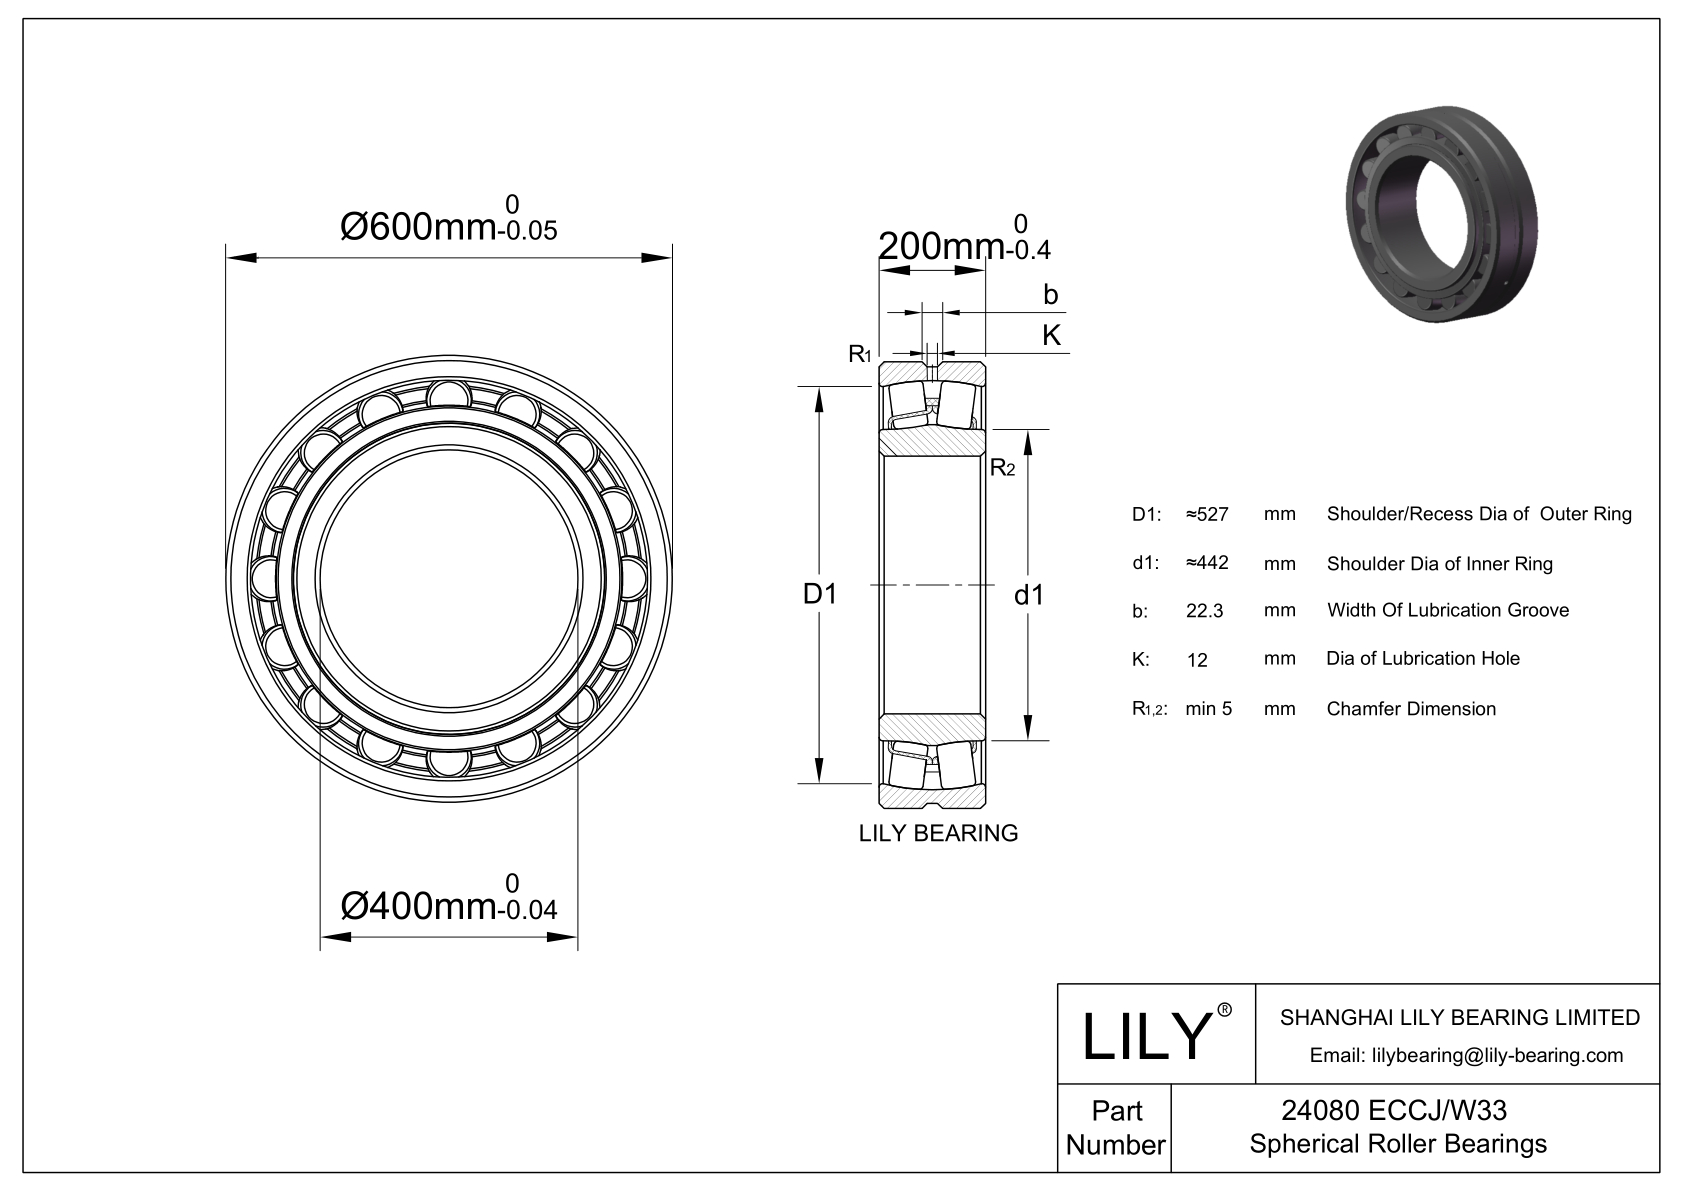 24080 ECCJ/W33 Double Row Spherical Roller Bearing cad drawing